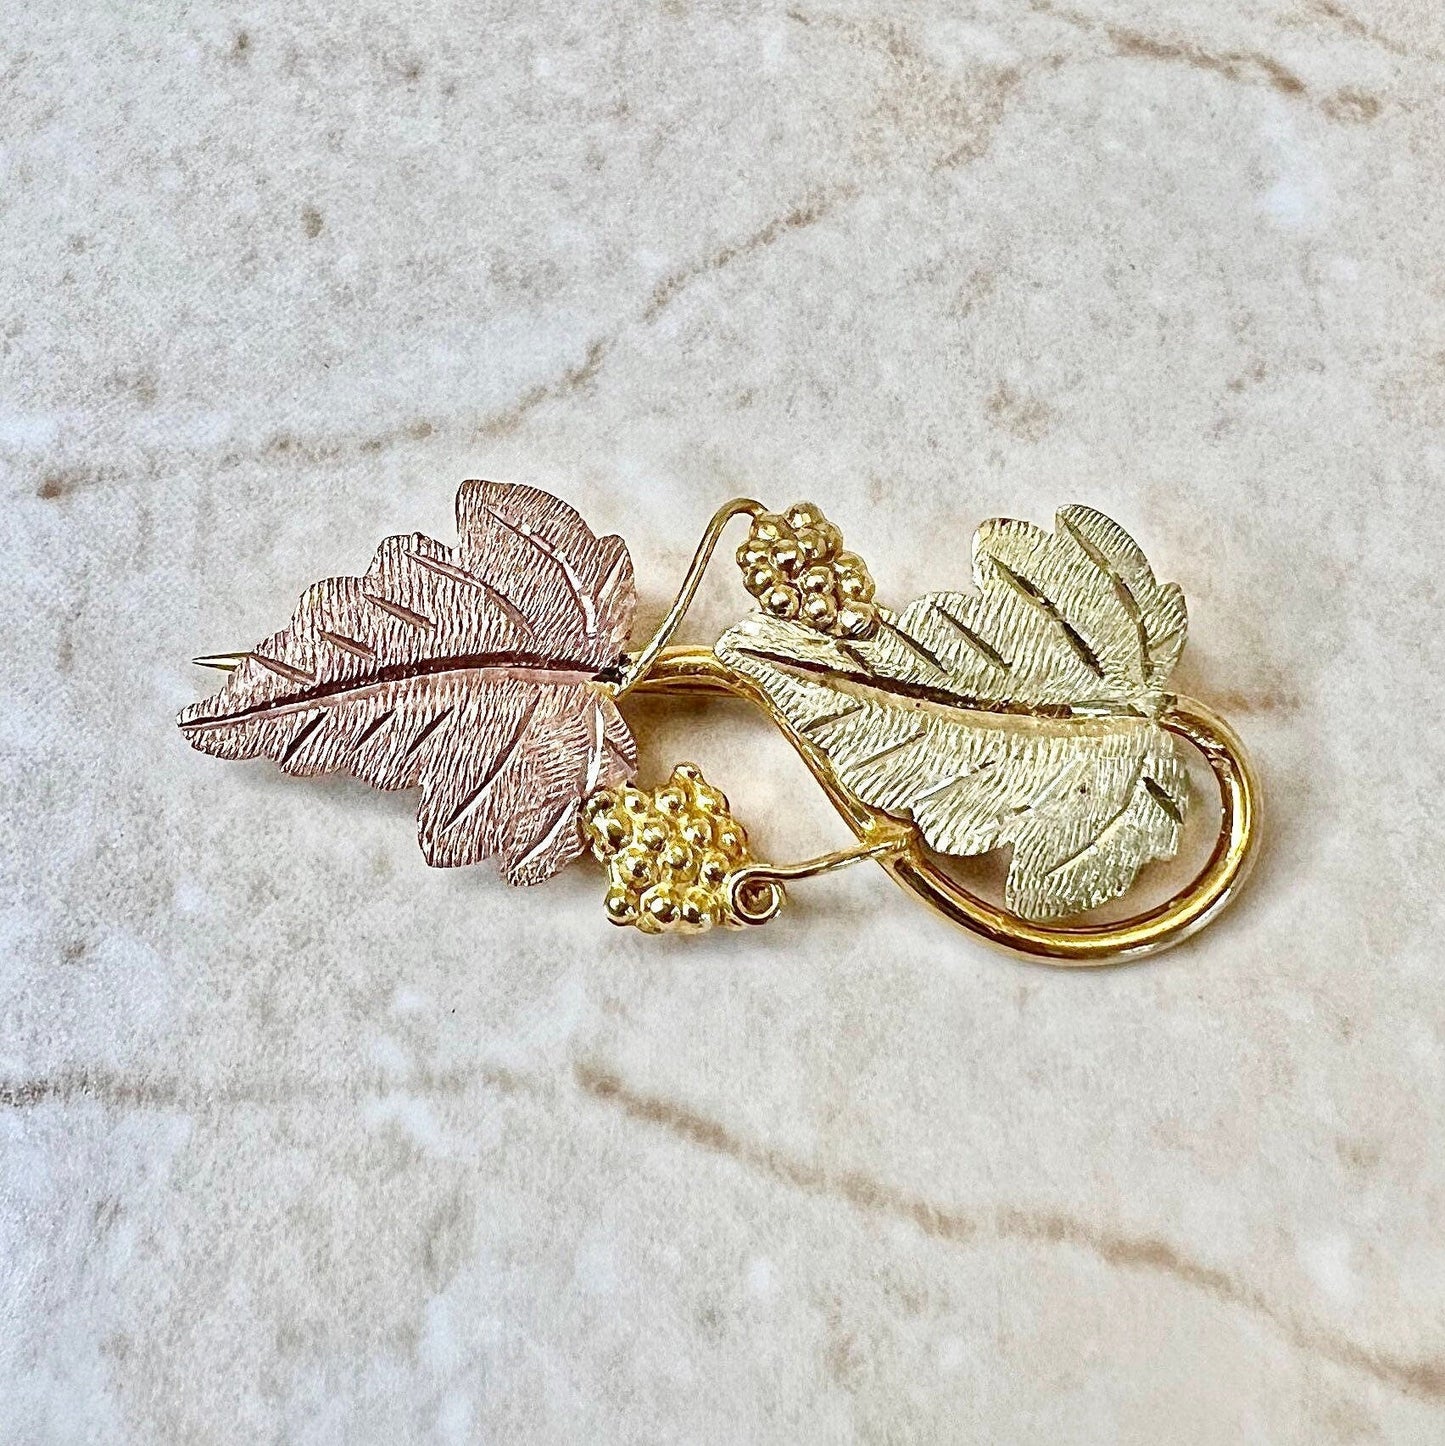 Vintage 10/12K Black Hills Gold Brooch Pin - Gold Grape Leaf Brooch - Birthday Gift - Jewelry Sale - Best Gift For Her